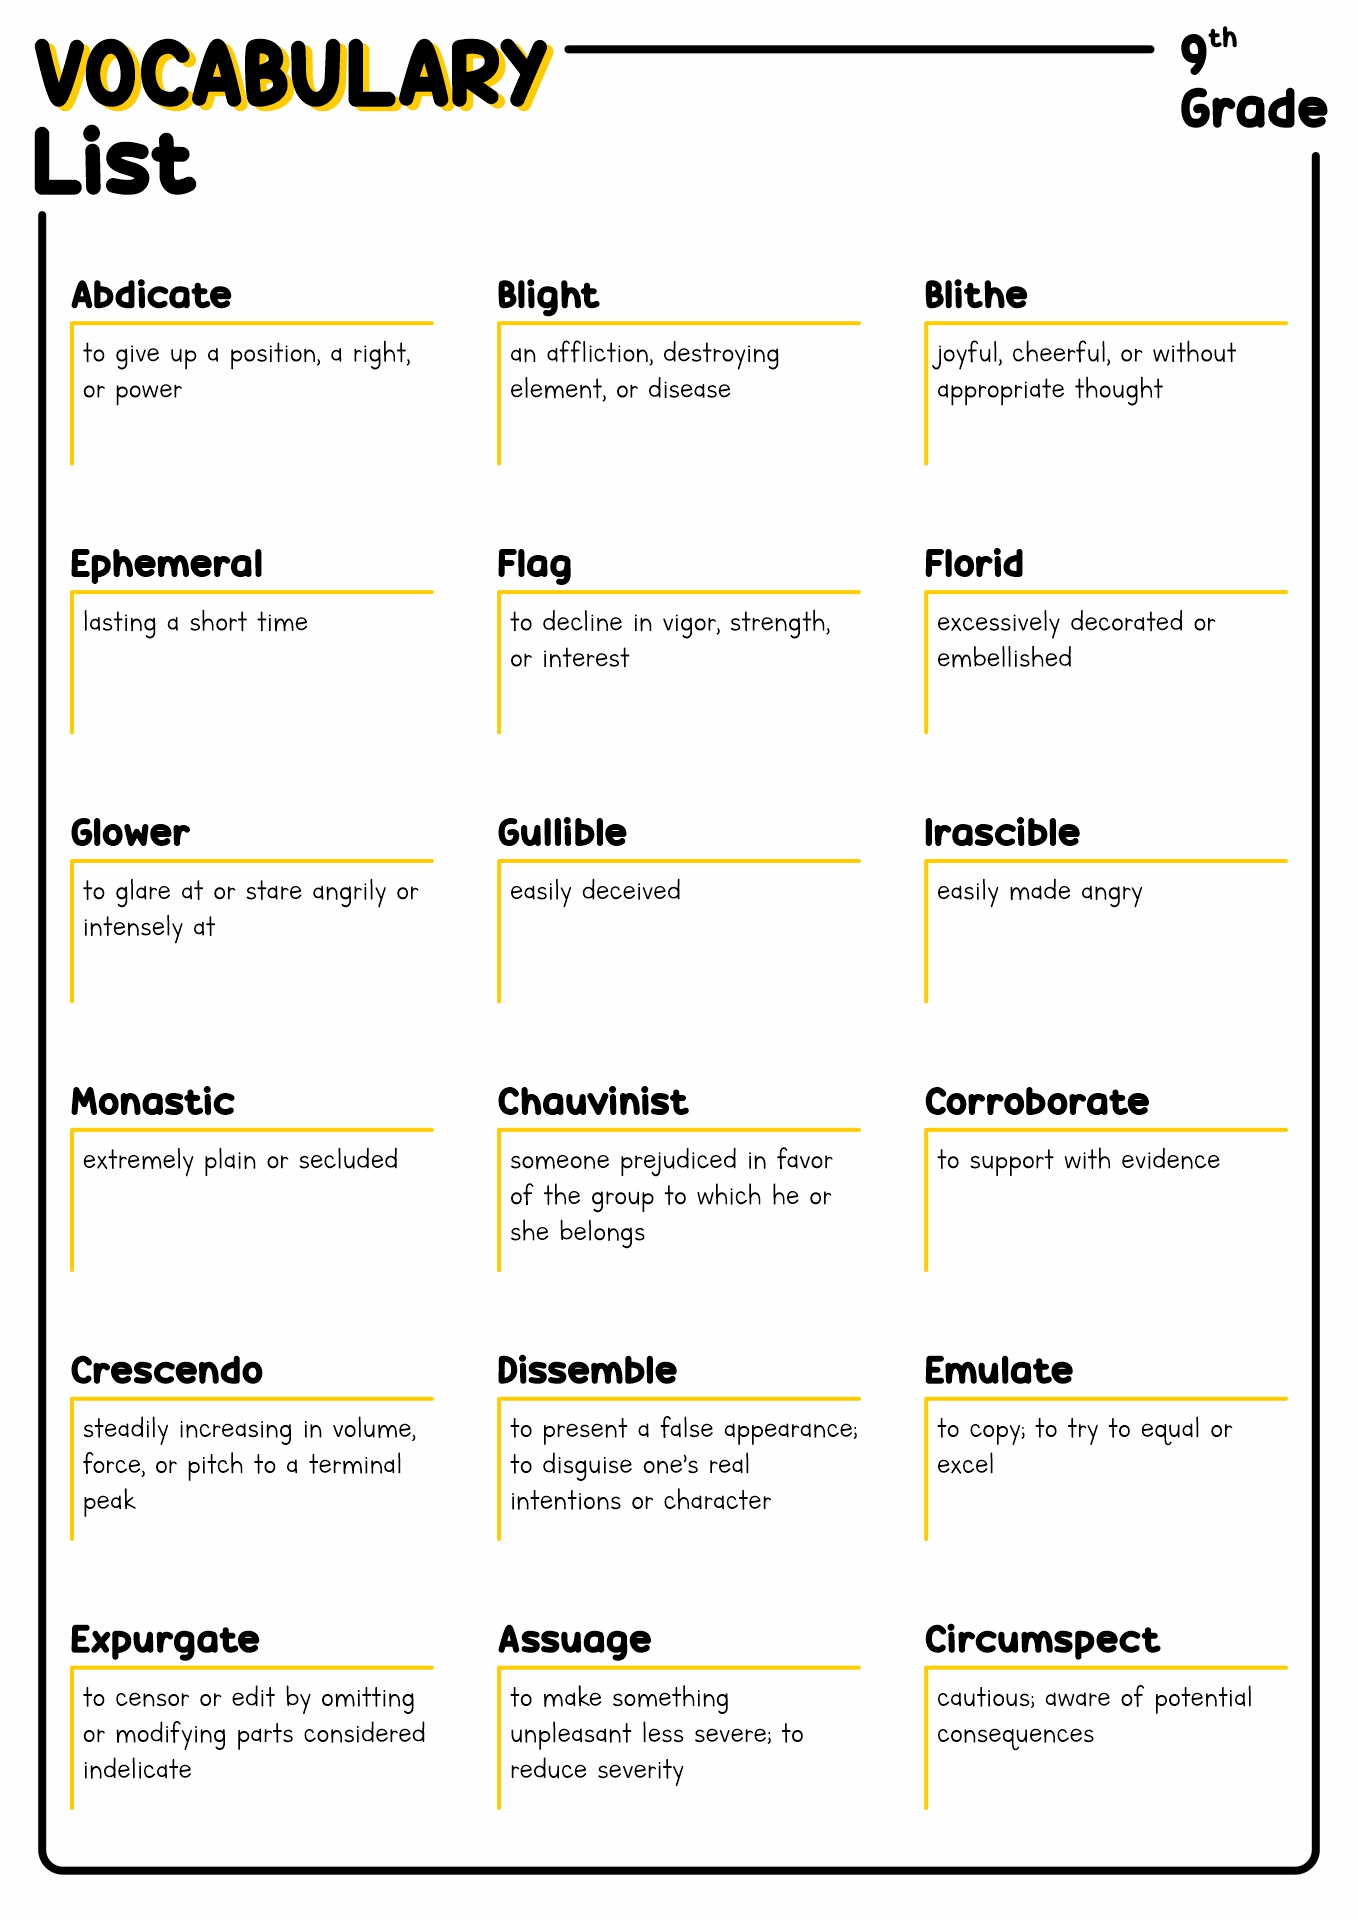 17-best-images-of-9th-grade-vocabulary-worksheets-9th-grade-spelling-words-worksheets